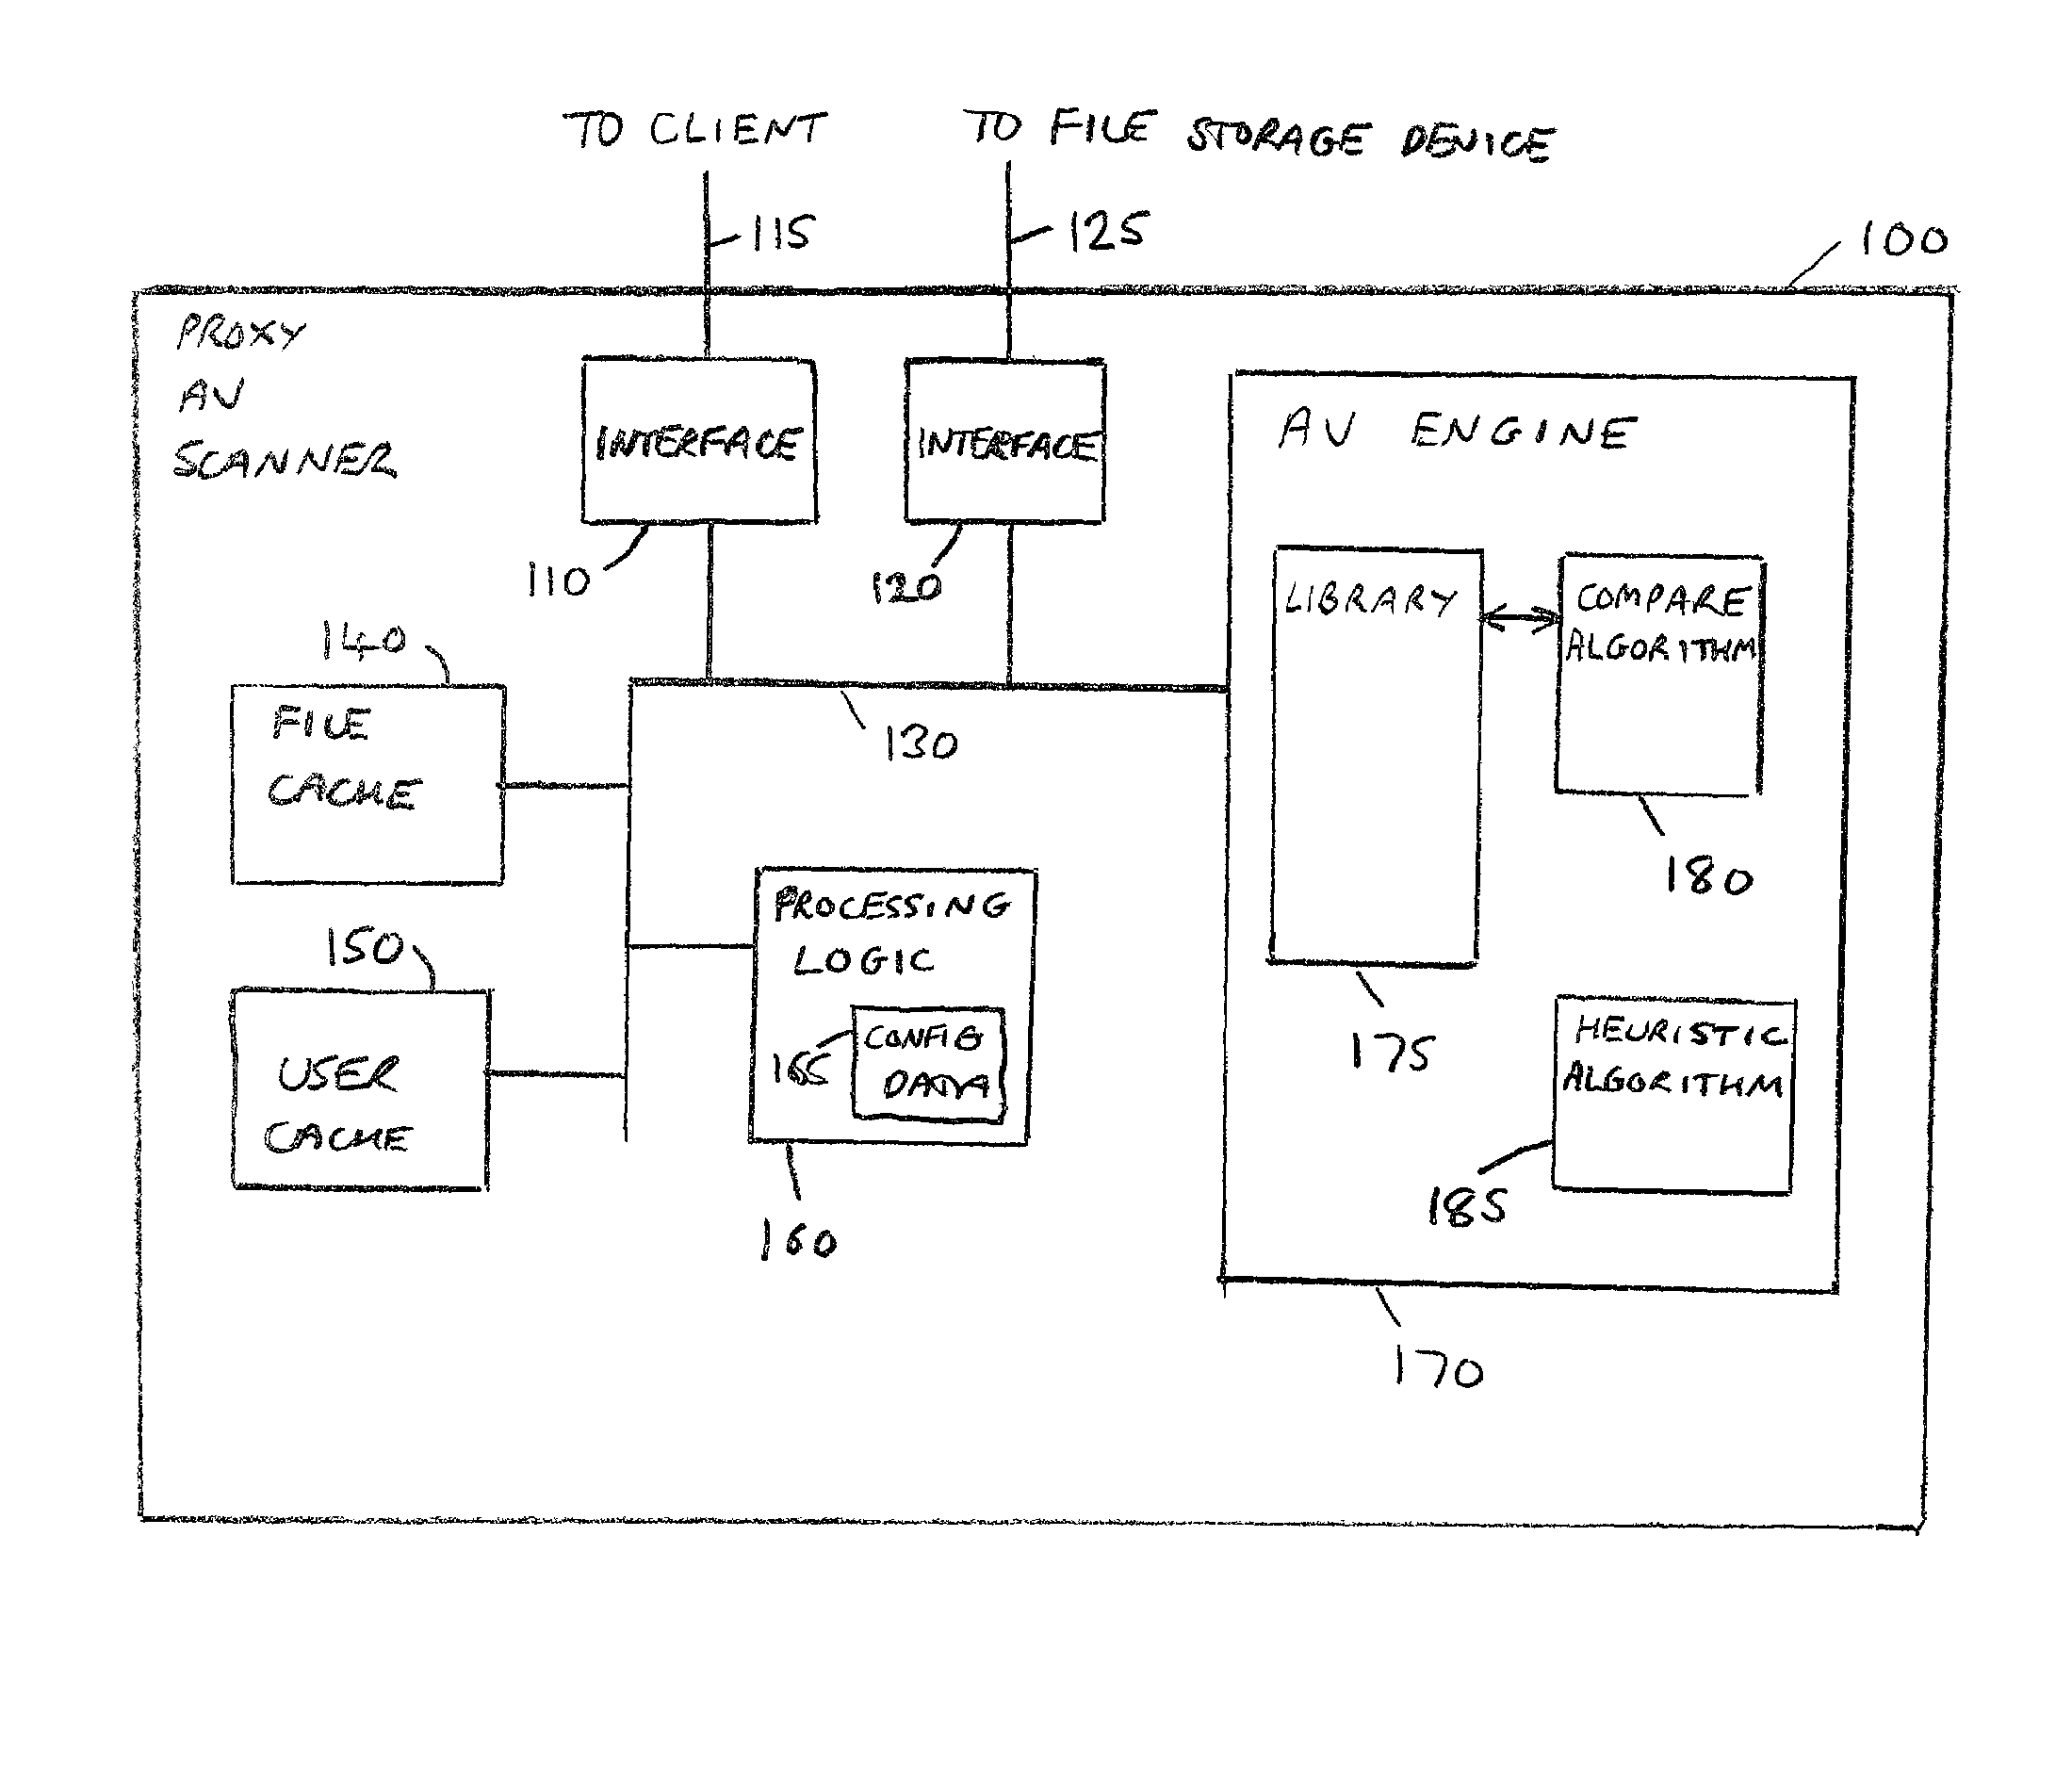 Handling of malware scanning of files stored within a file storage device of a computer network